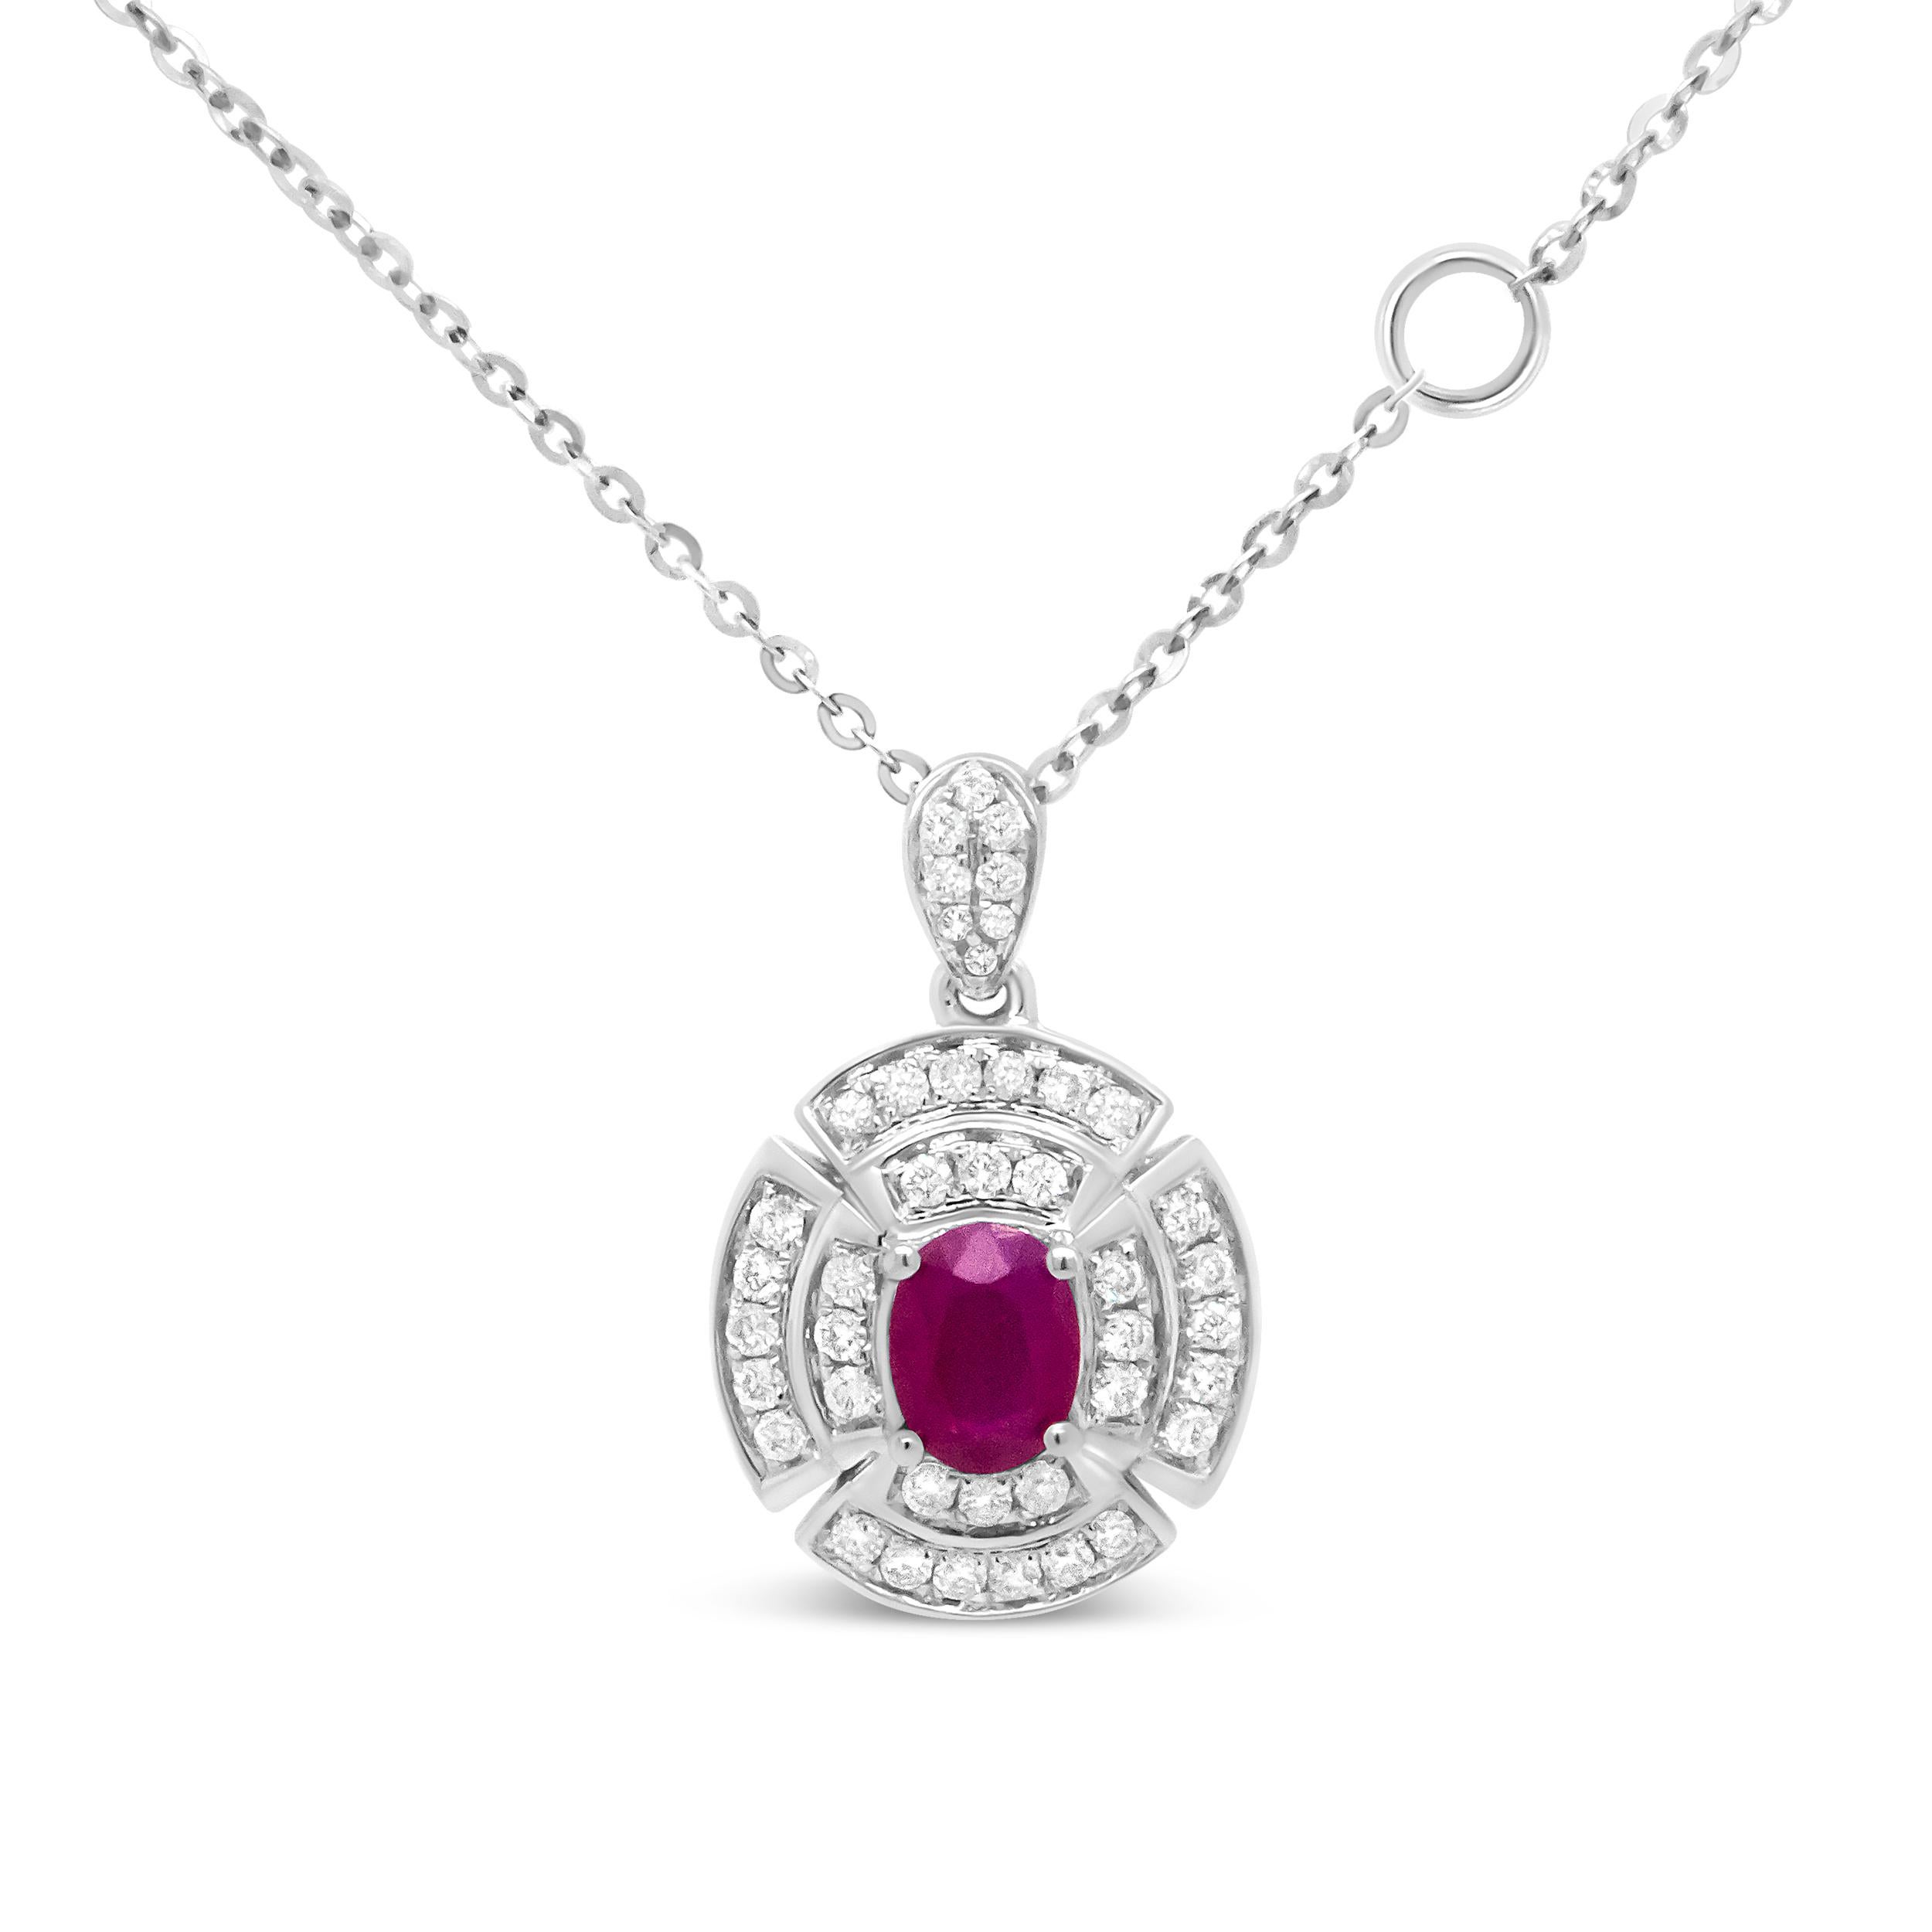 18K White Gold 1/5 Carat Round Diamond and Red Ruby Double Halo Pendant Necklace